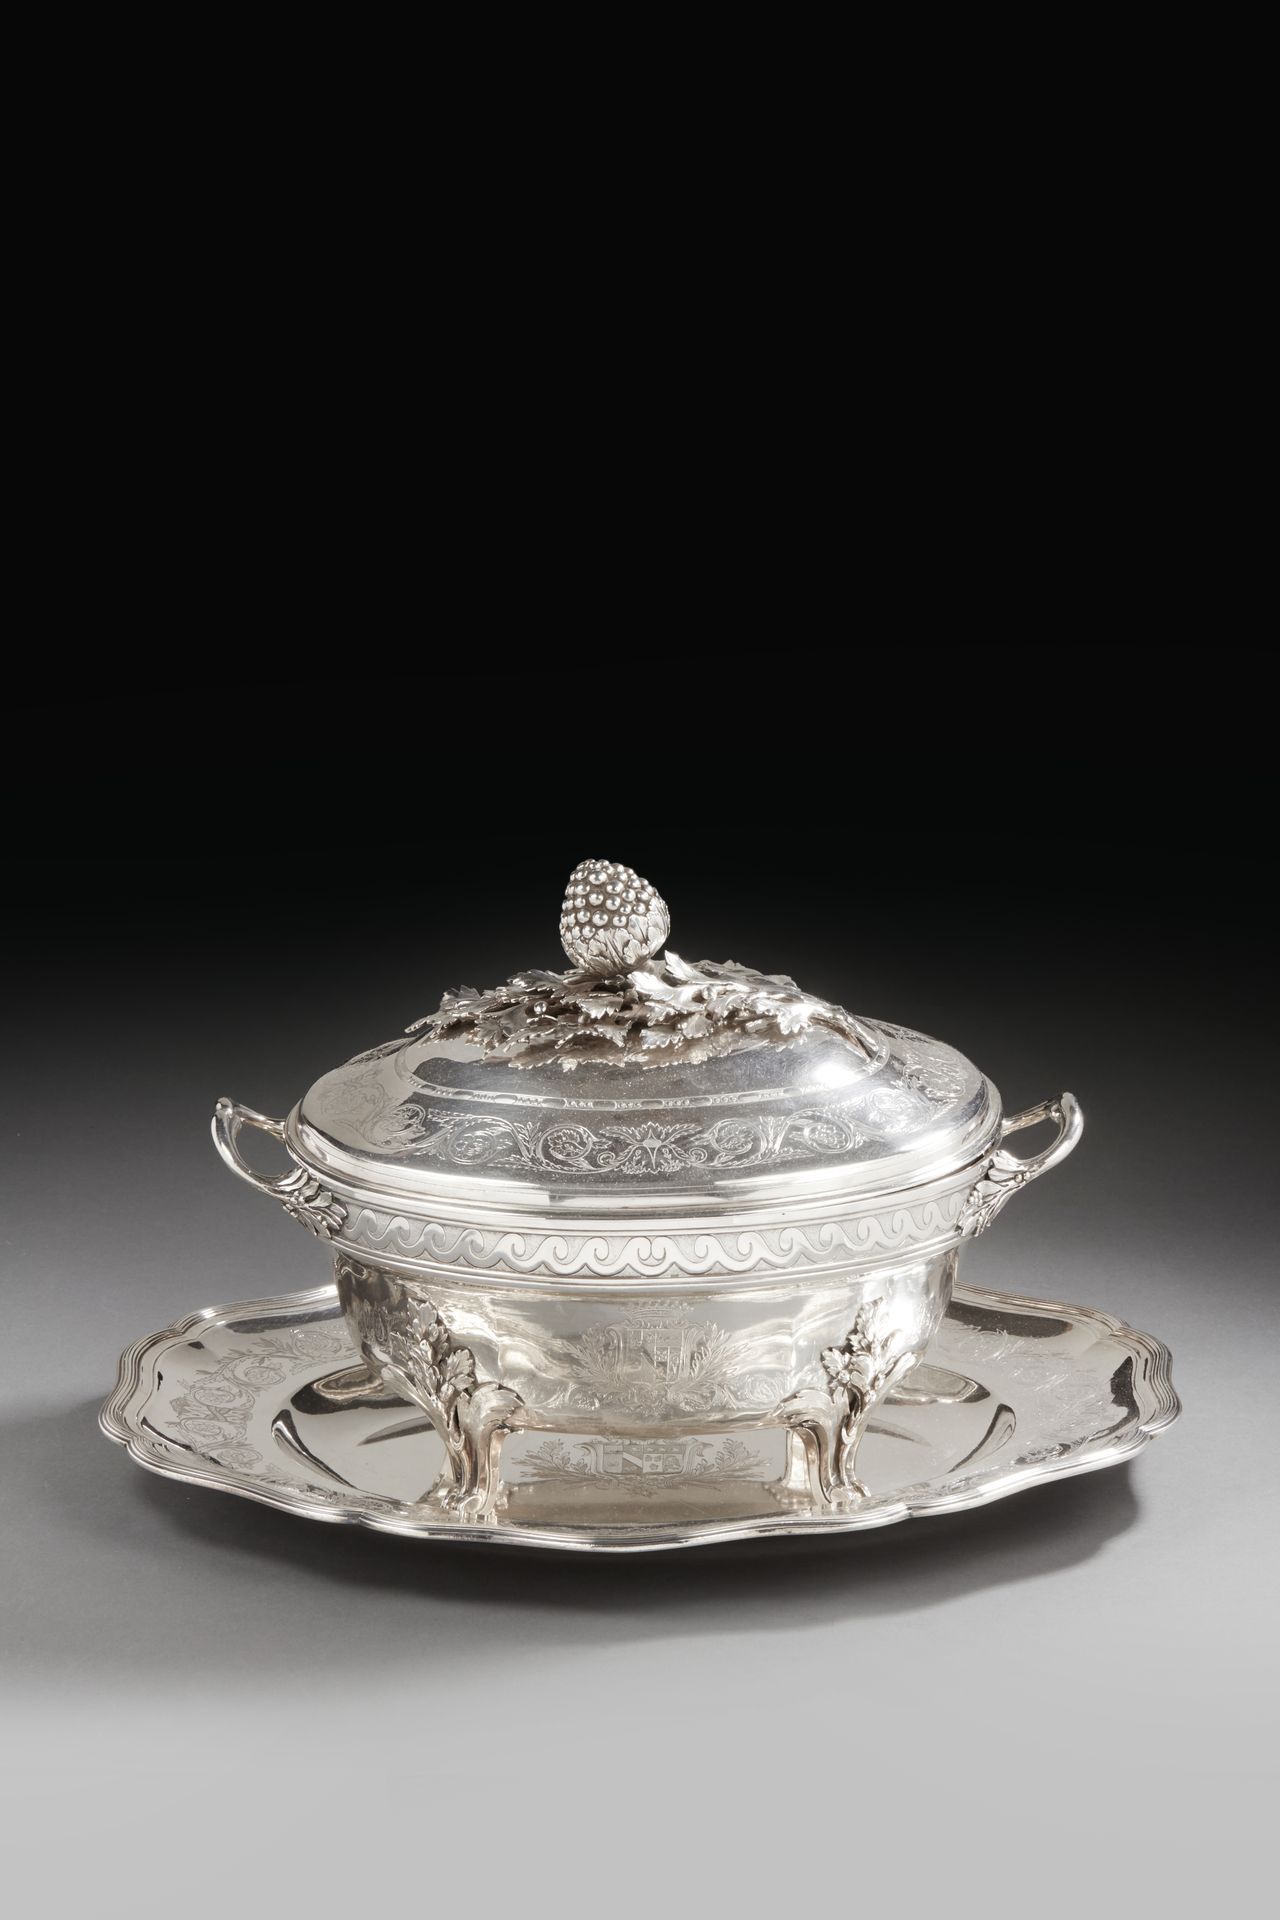 Null PARIS 1782 - 1783
Silver tureen, complete with its frame and lining. The ov&hellip;